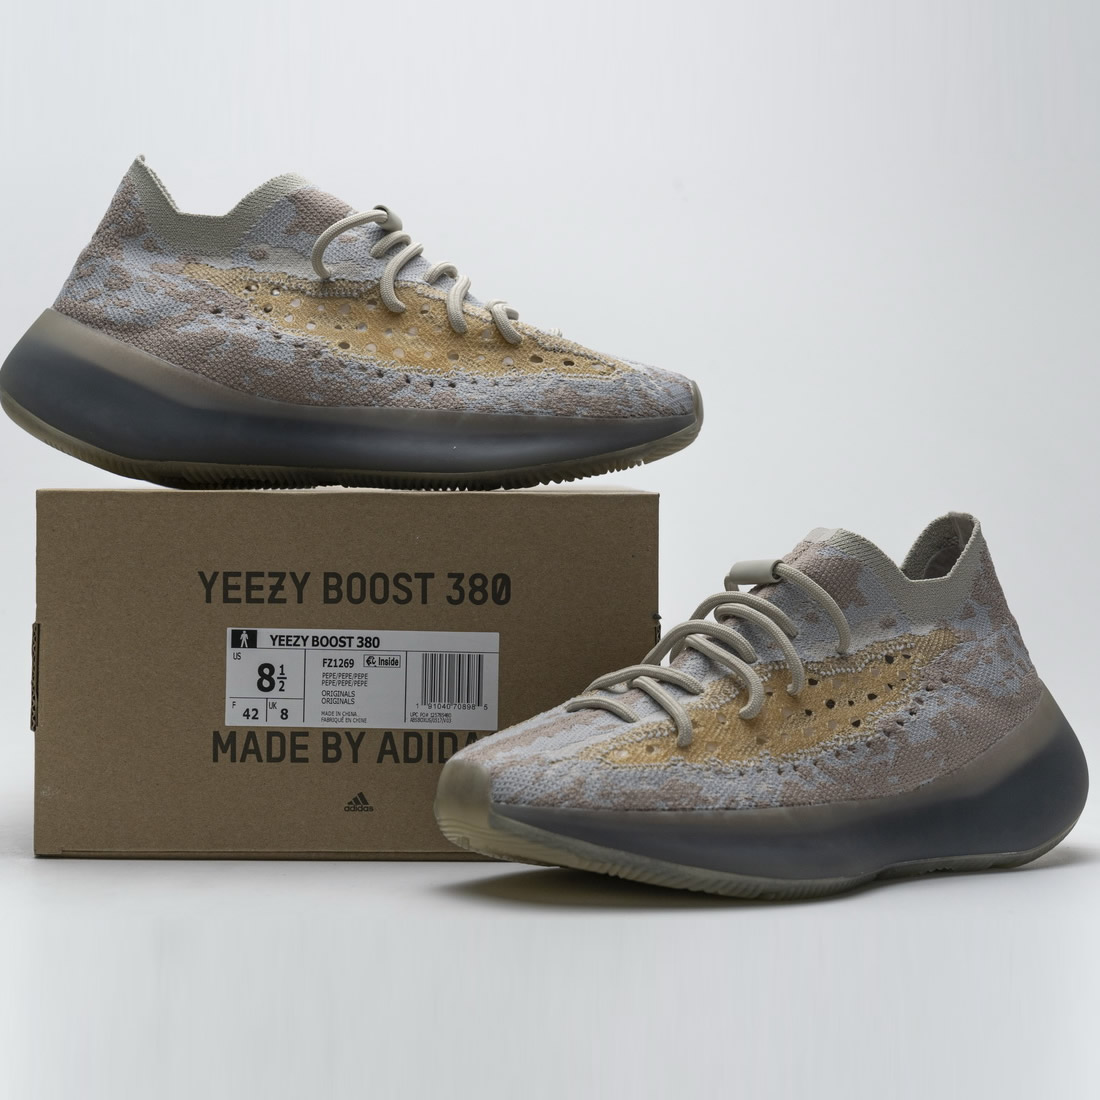 Adidas Yeezy Boost 380 Pepper Non Reflective Fz1269 New Release Date For Sale 5 - kickbulk.org